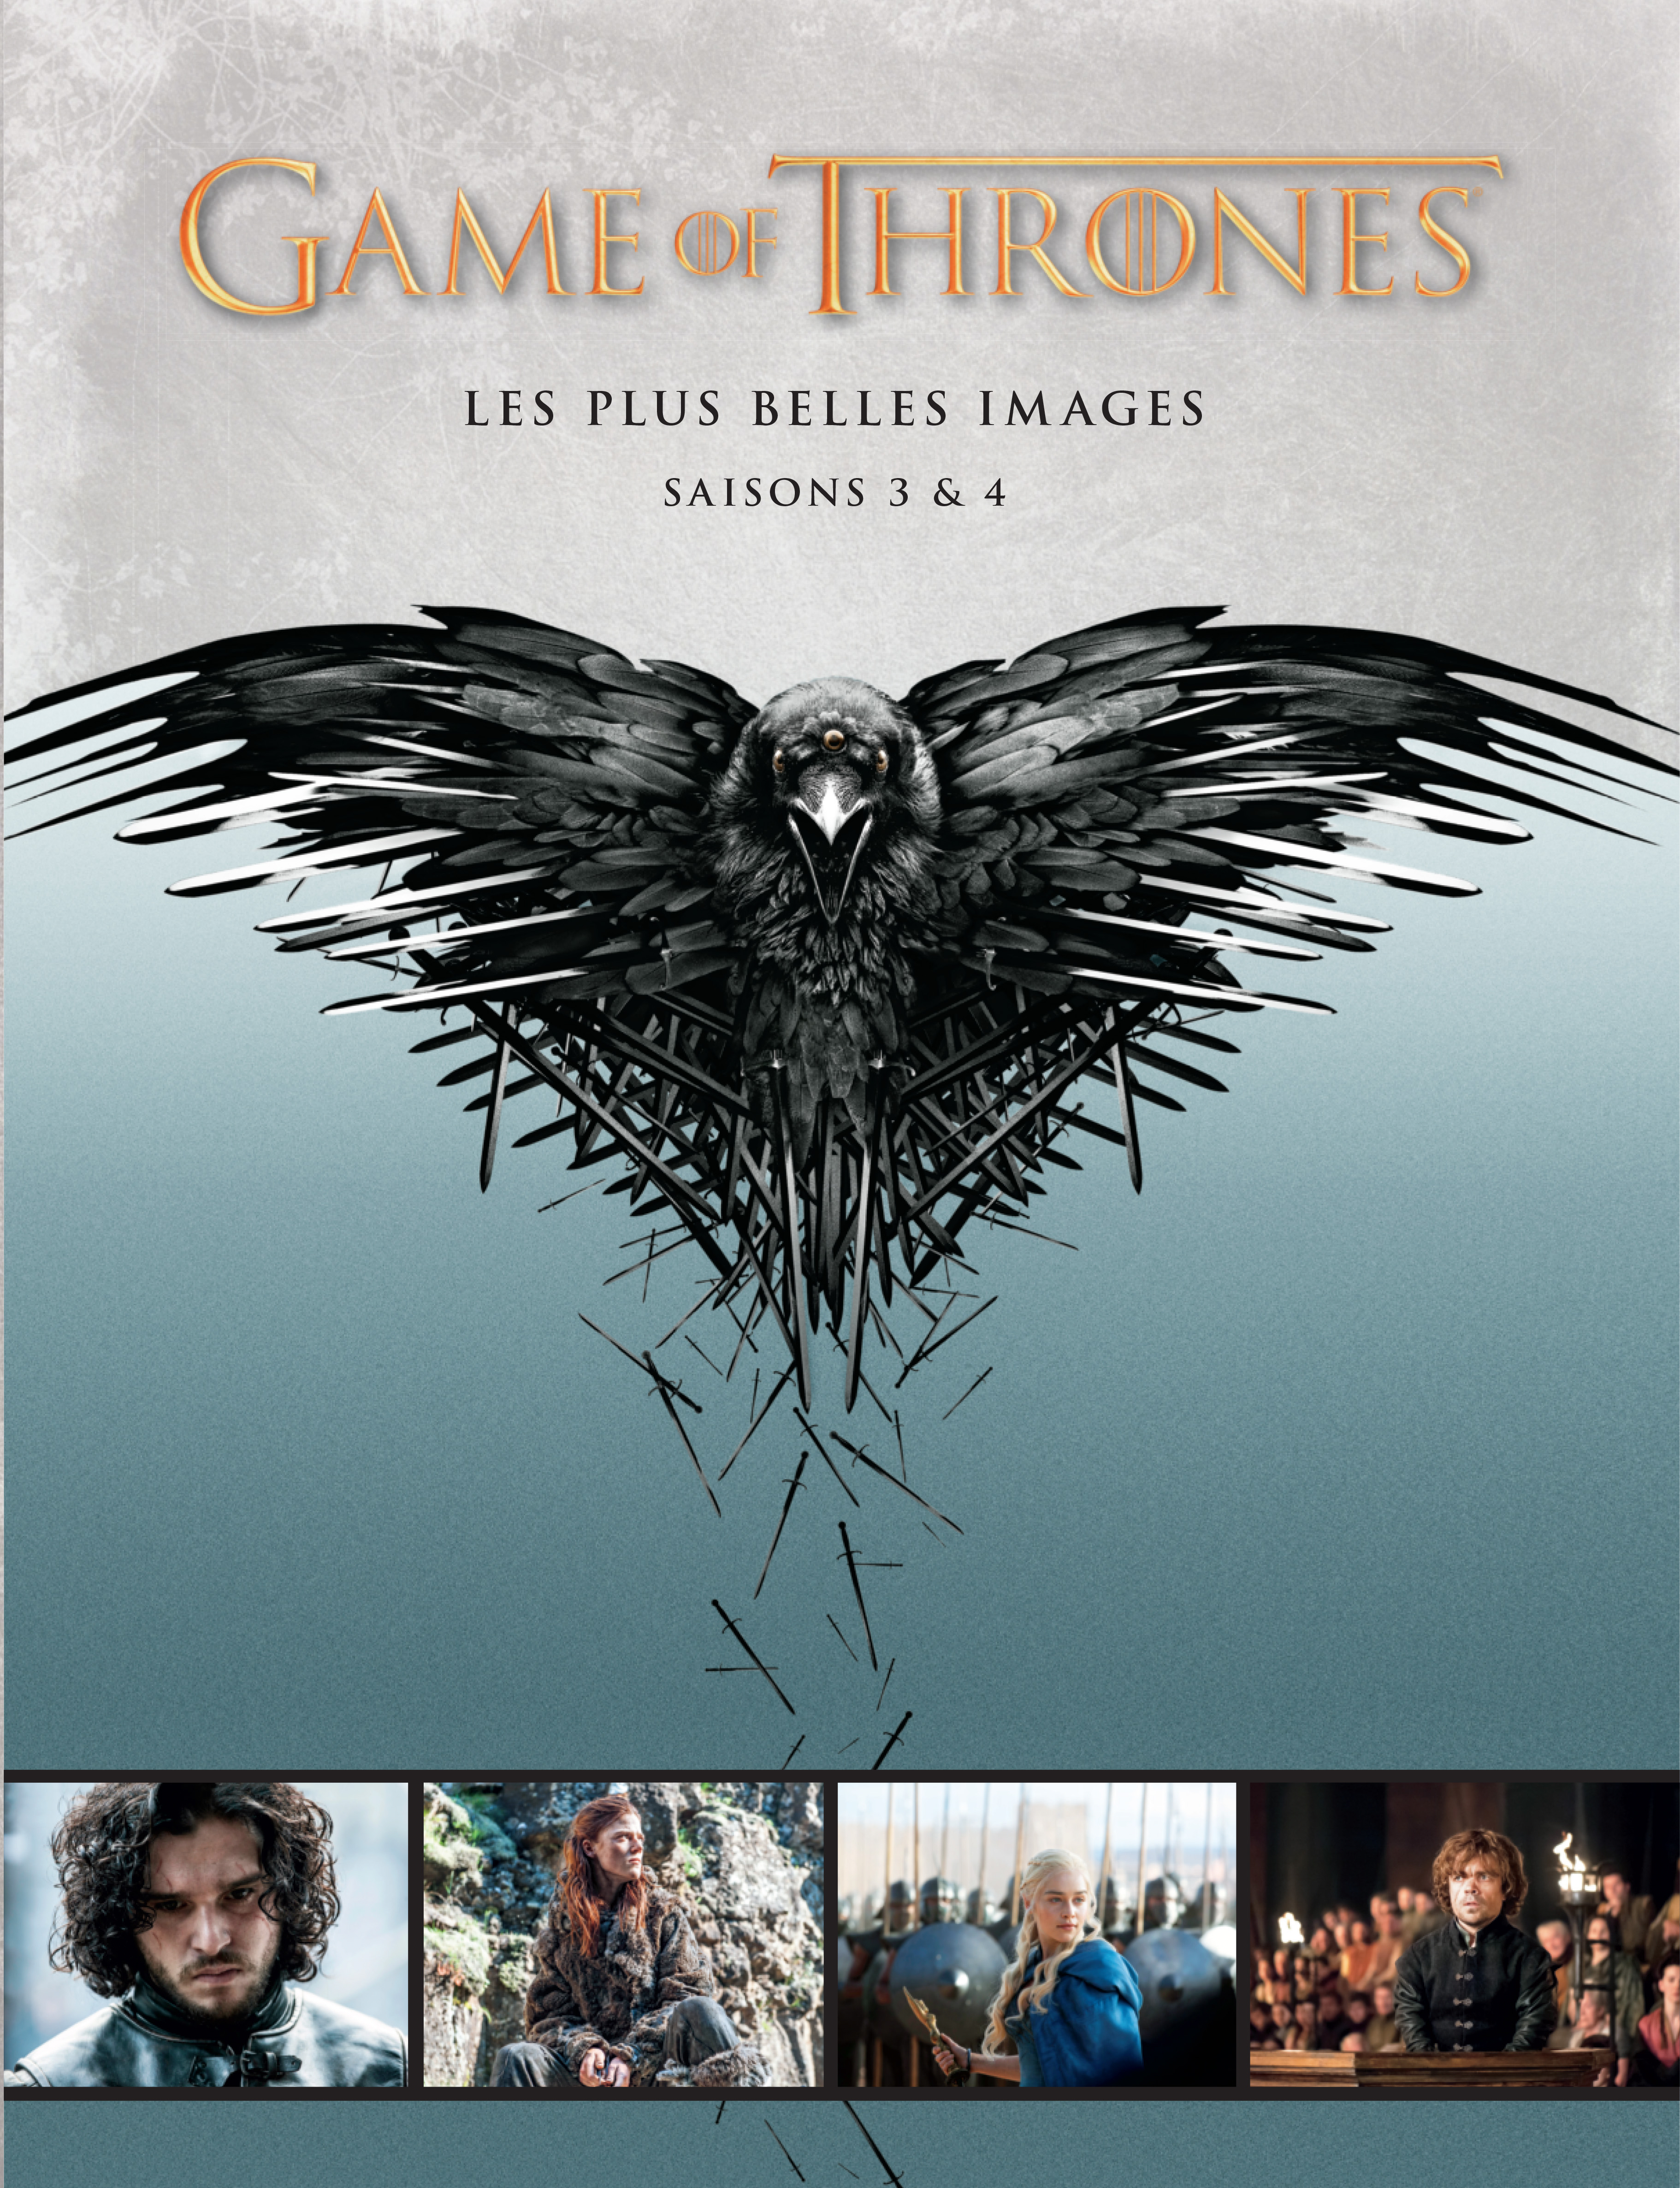 Game of Thrones - Les Plus Belles Images – Tome 2 – Game of Thrones : Le Trône de Fer, les plus belles images n°2 - couv